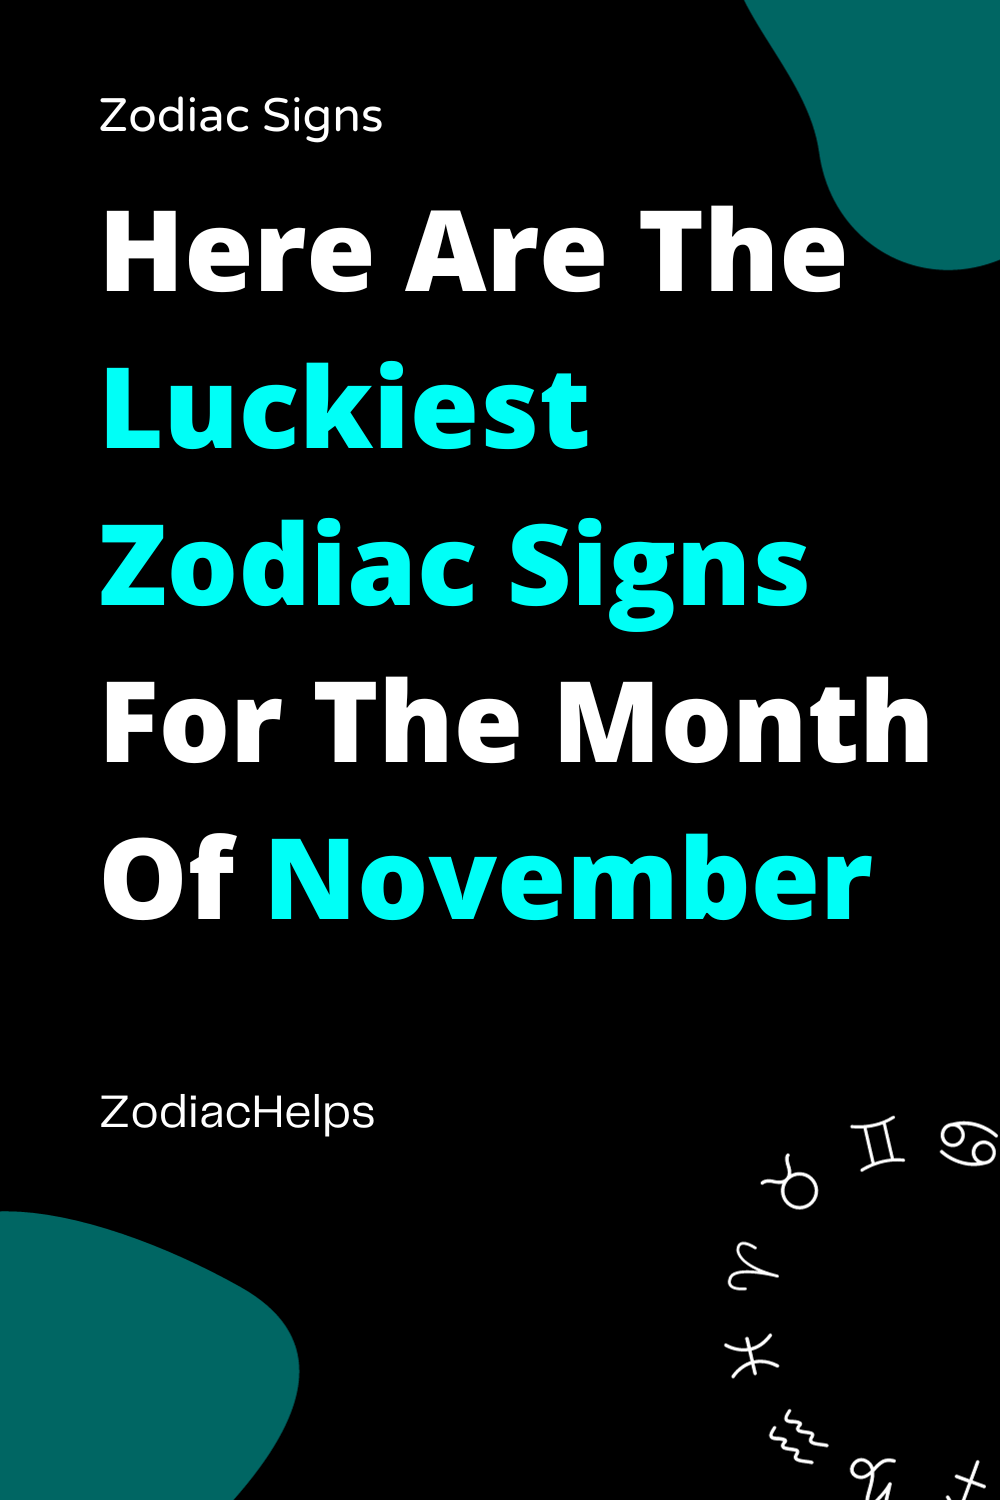 Here Are The Luckiest Zodiac Signs For The Month Of November